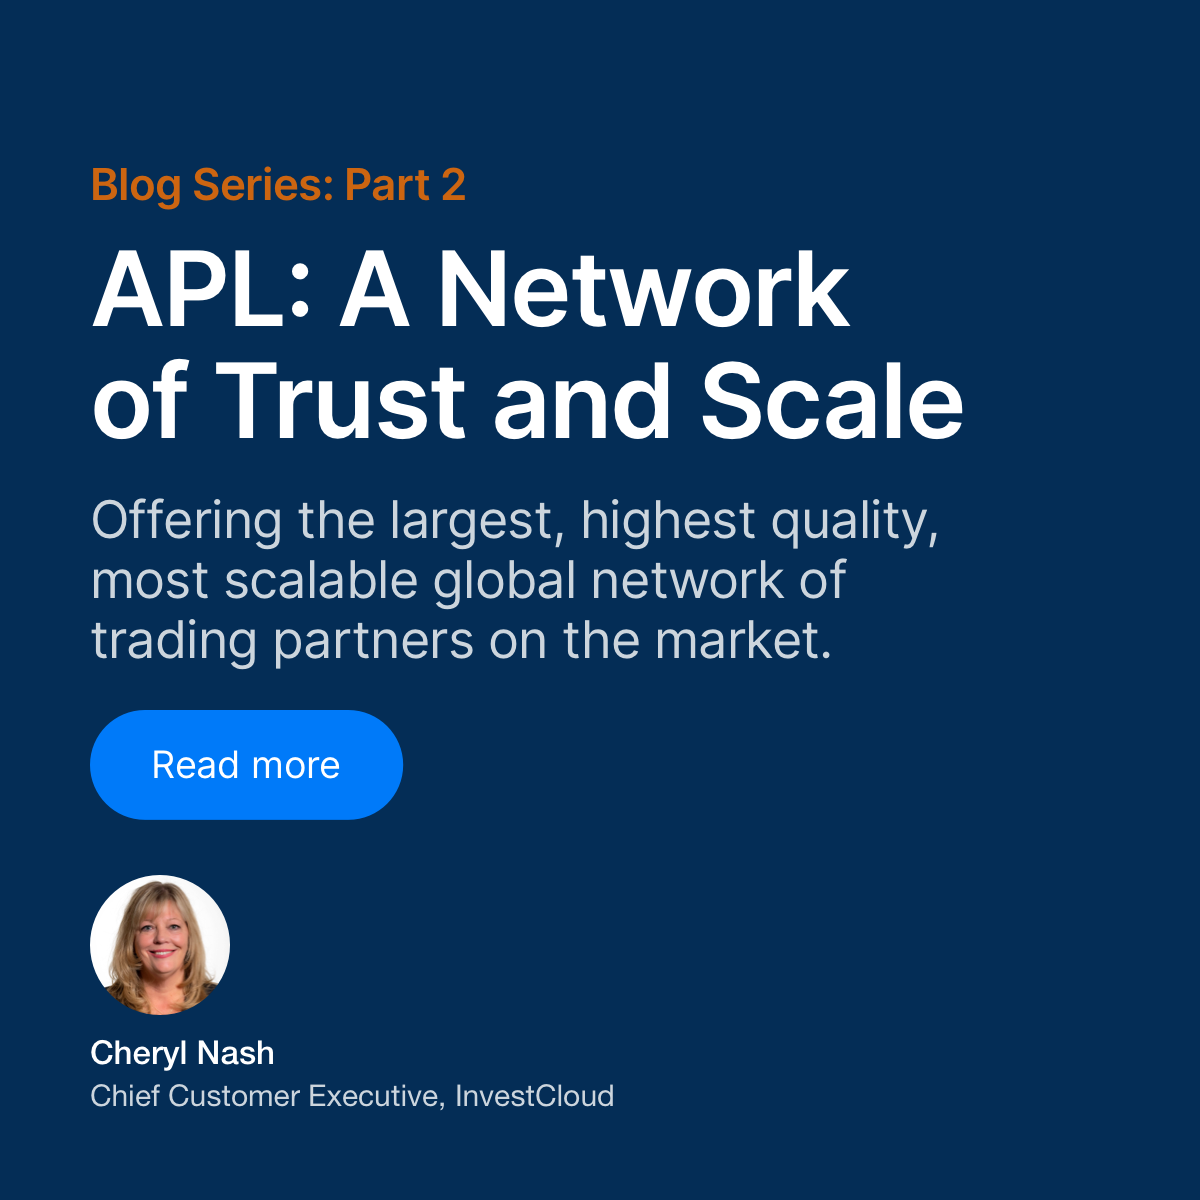 Blog Series: Part 2 APL: A Network of Trust and Scale